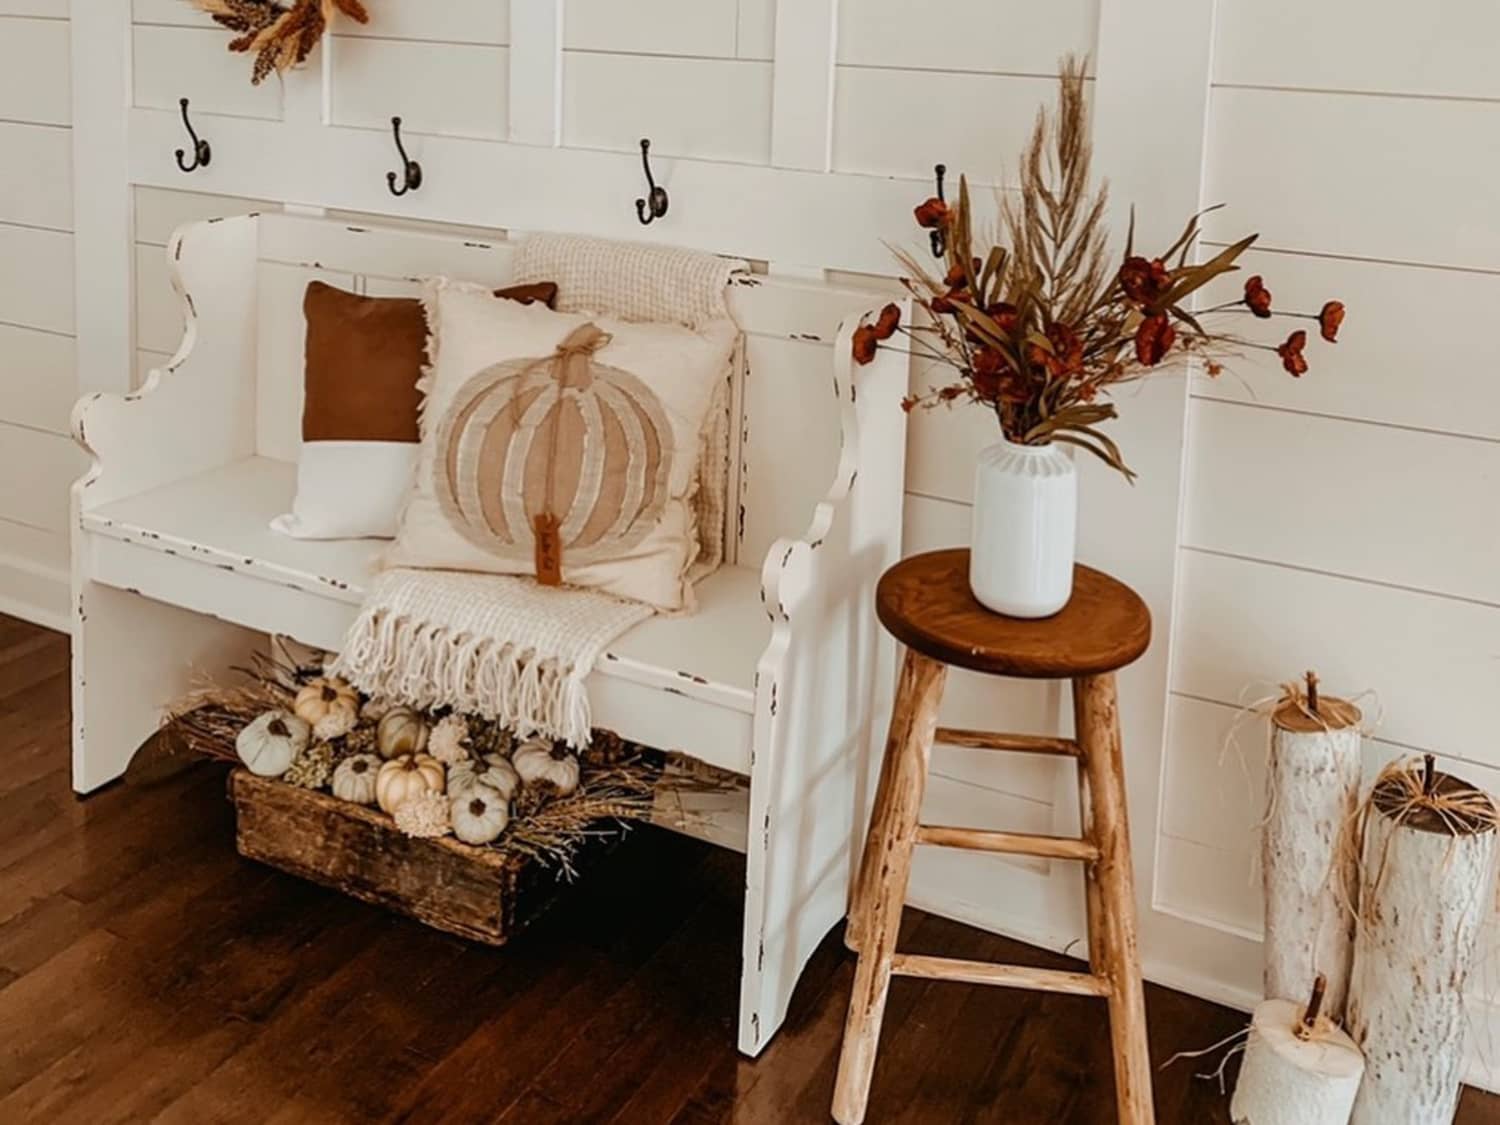 38 Fun Fall Decorating Ideas - How to Add an Autumn Decor Vibe to Your Home  | Apartment Therapy